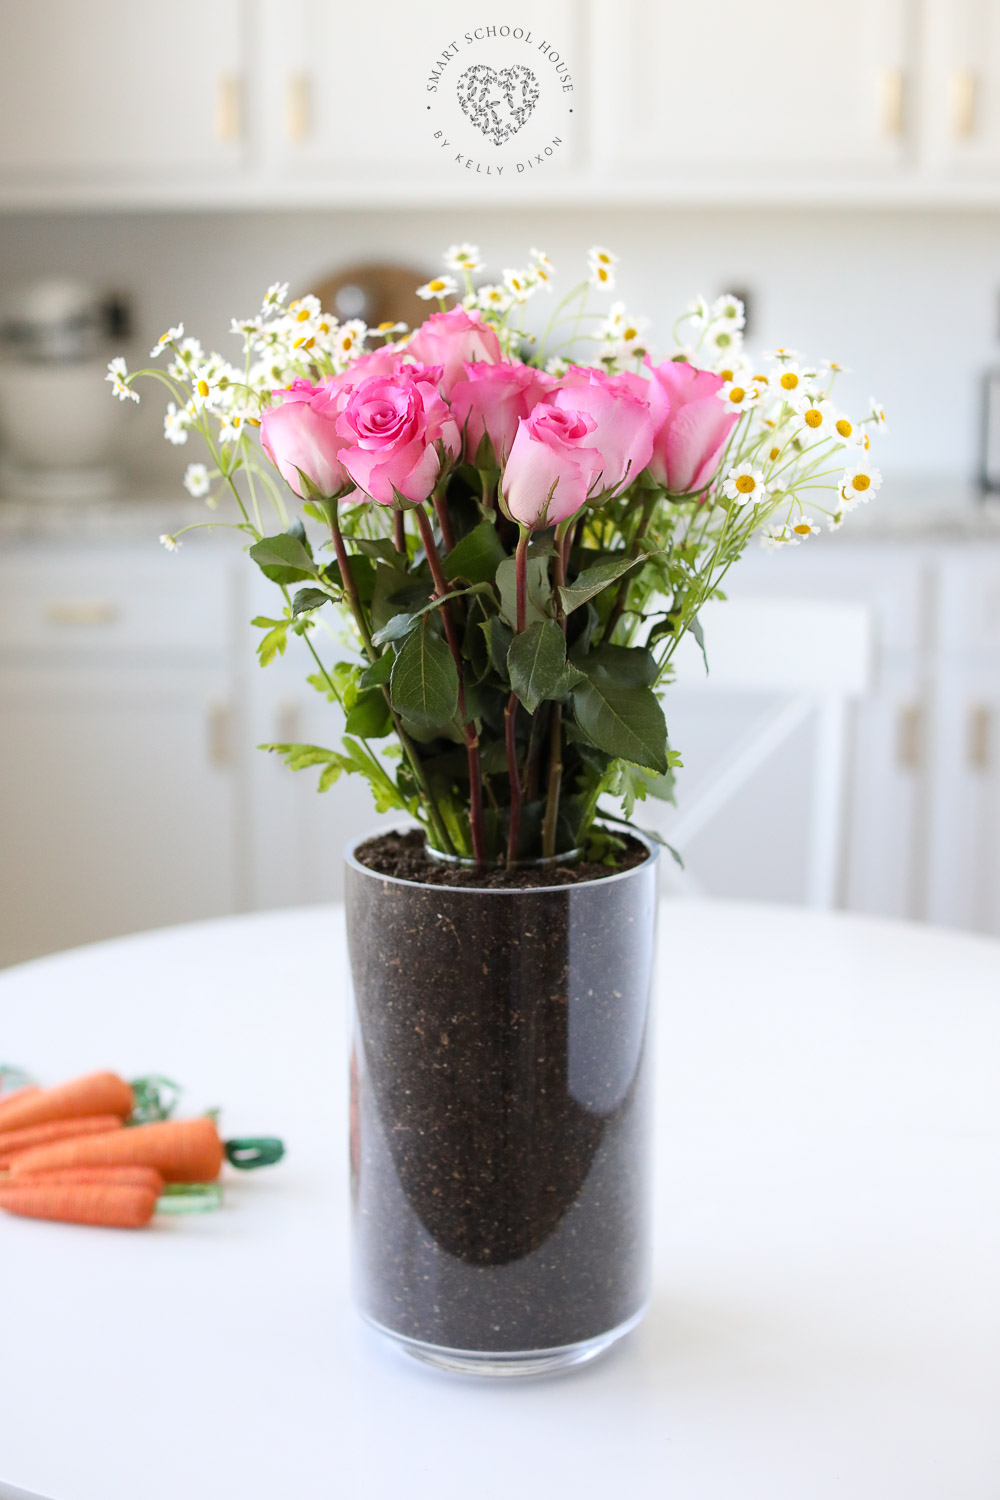 Fresh flowers sit inside of a hidden vase surrounded by soil